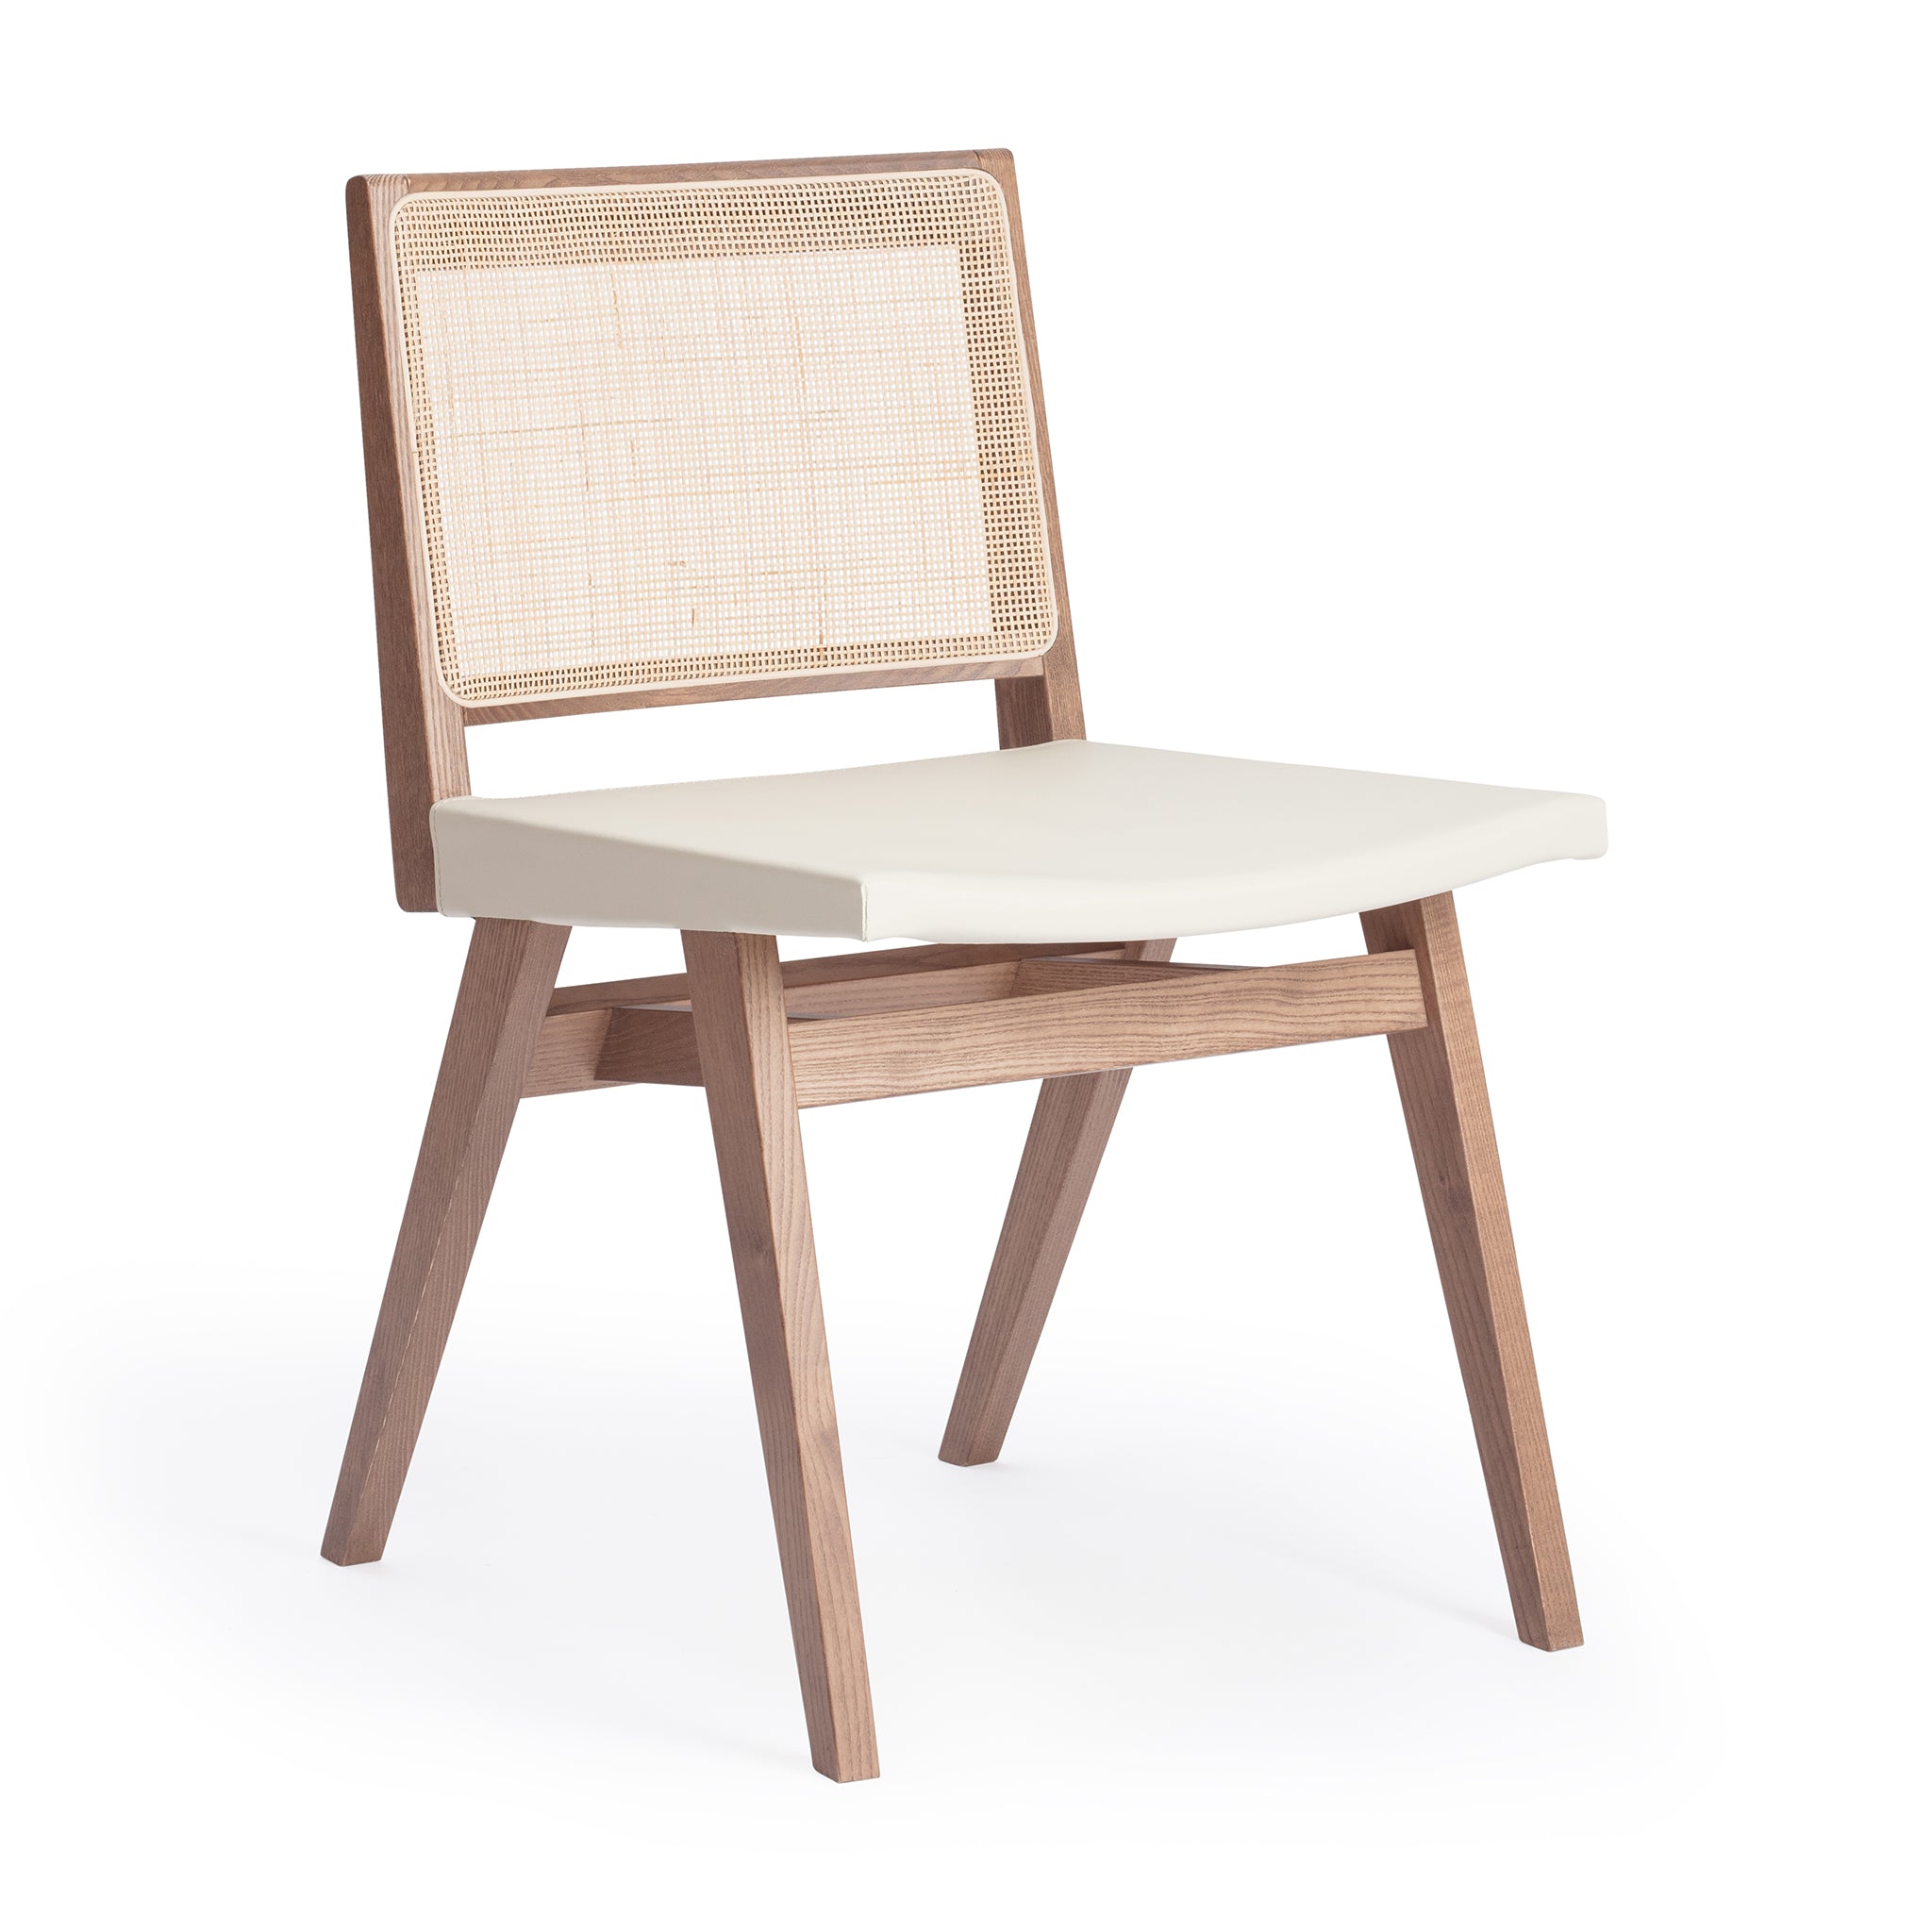 Main view of an Elye modern dining side chair, walnut stained ash frame, square weave cane back, contract grade off white leather seat, produced by Klarel in Italy. #K41-1